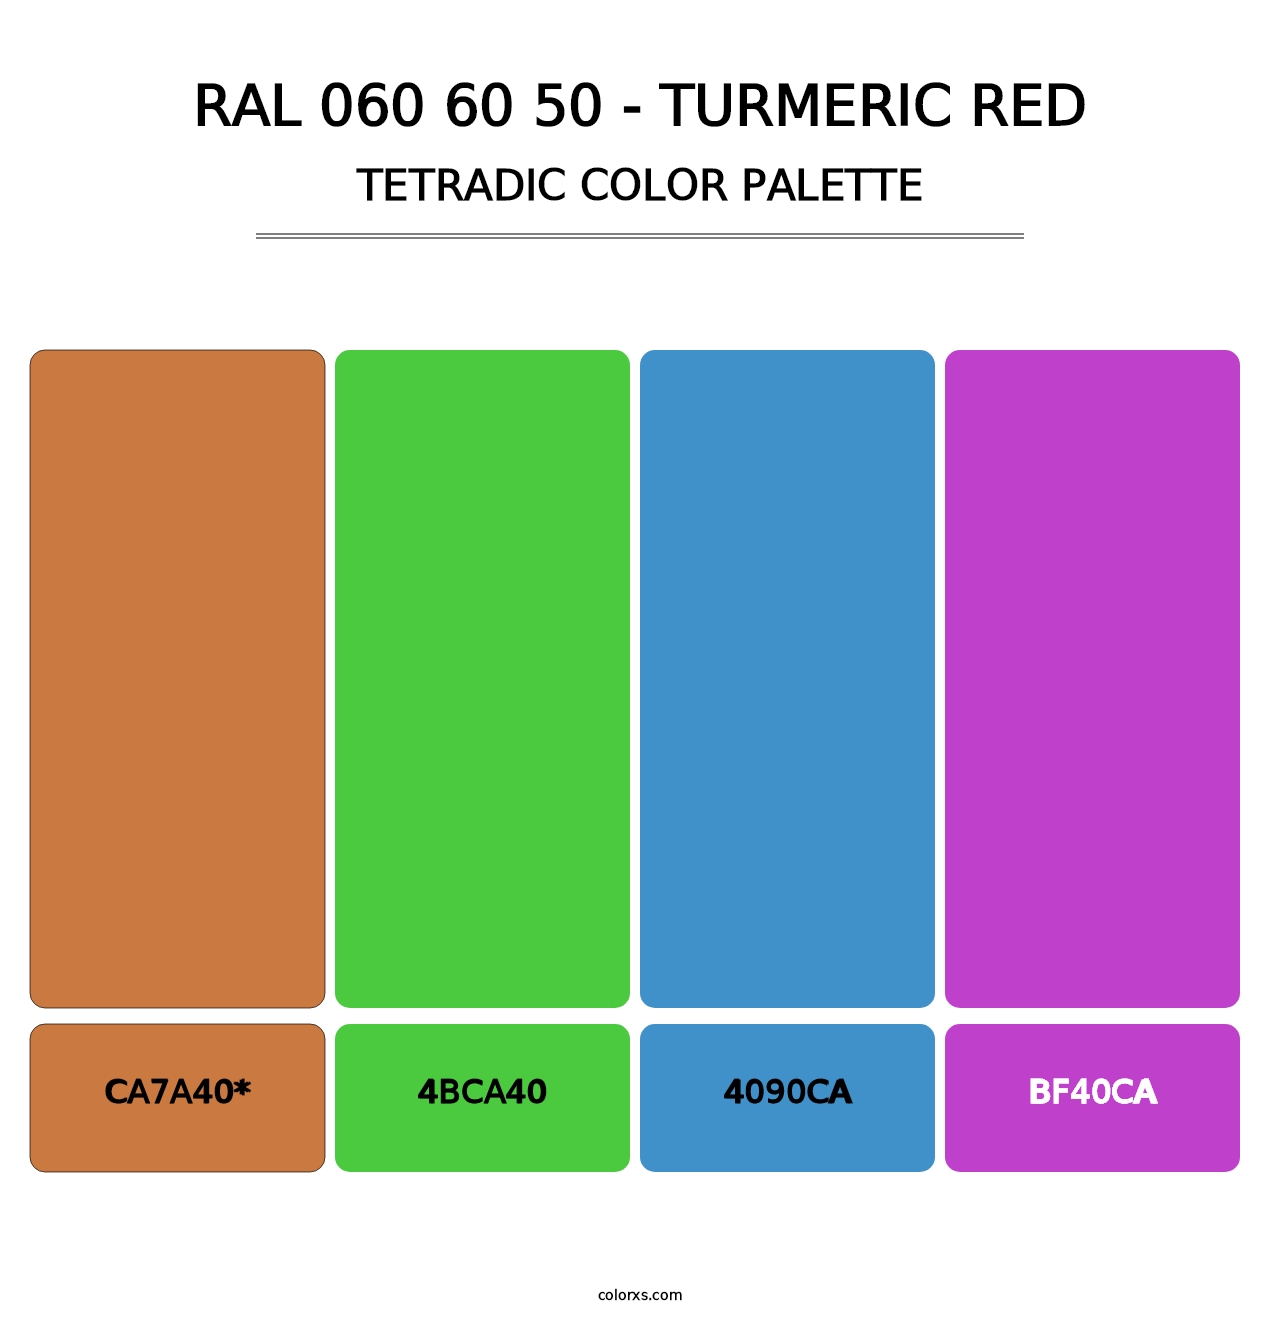 RAL 060 60 50 - Turmeric Red - Tetradic Color Palette